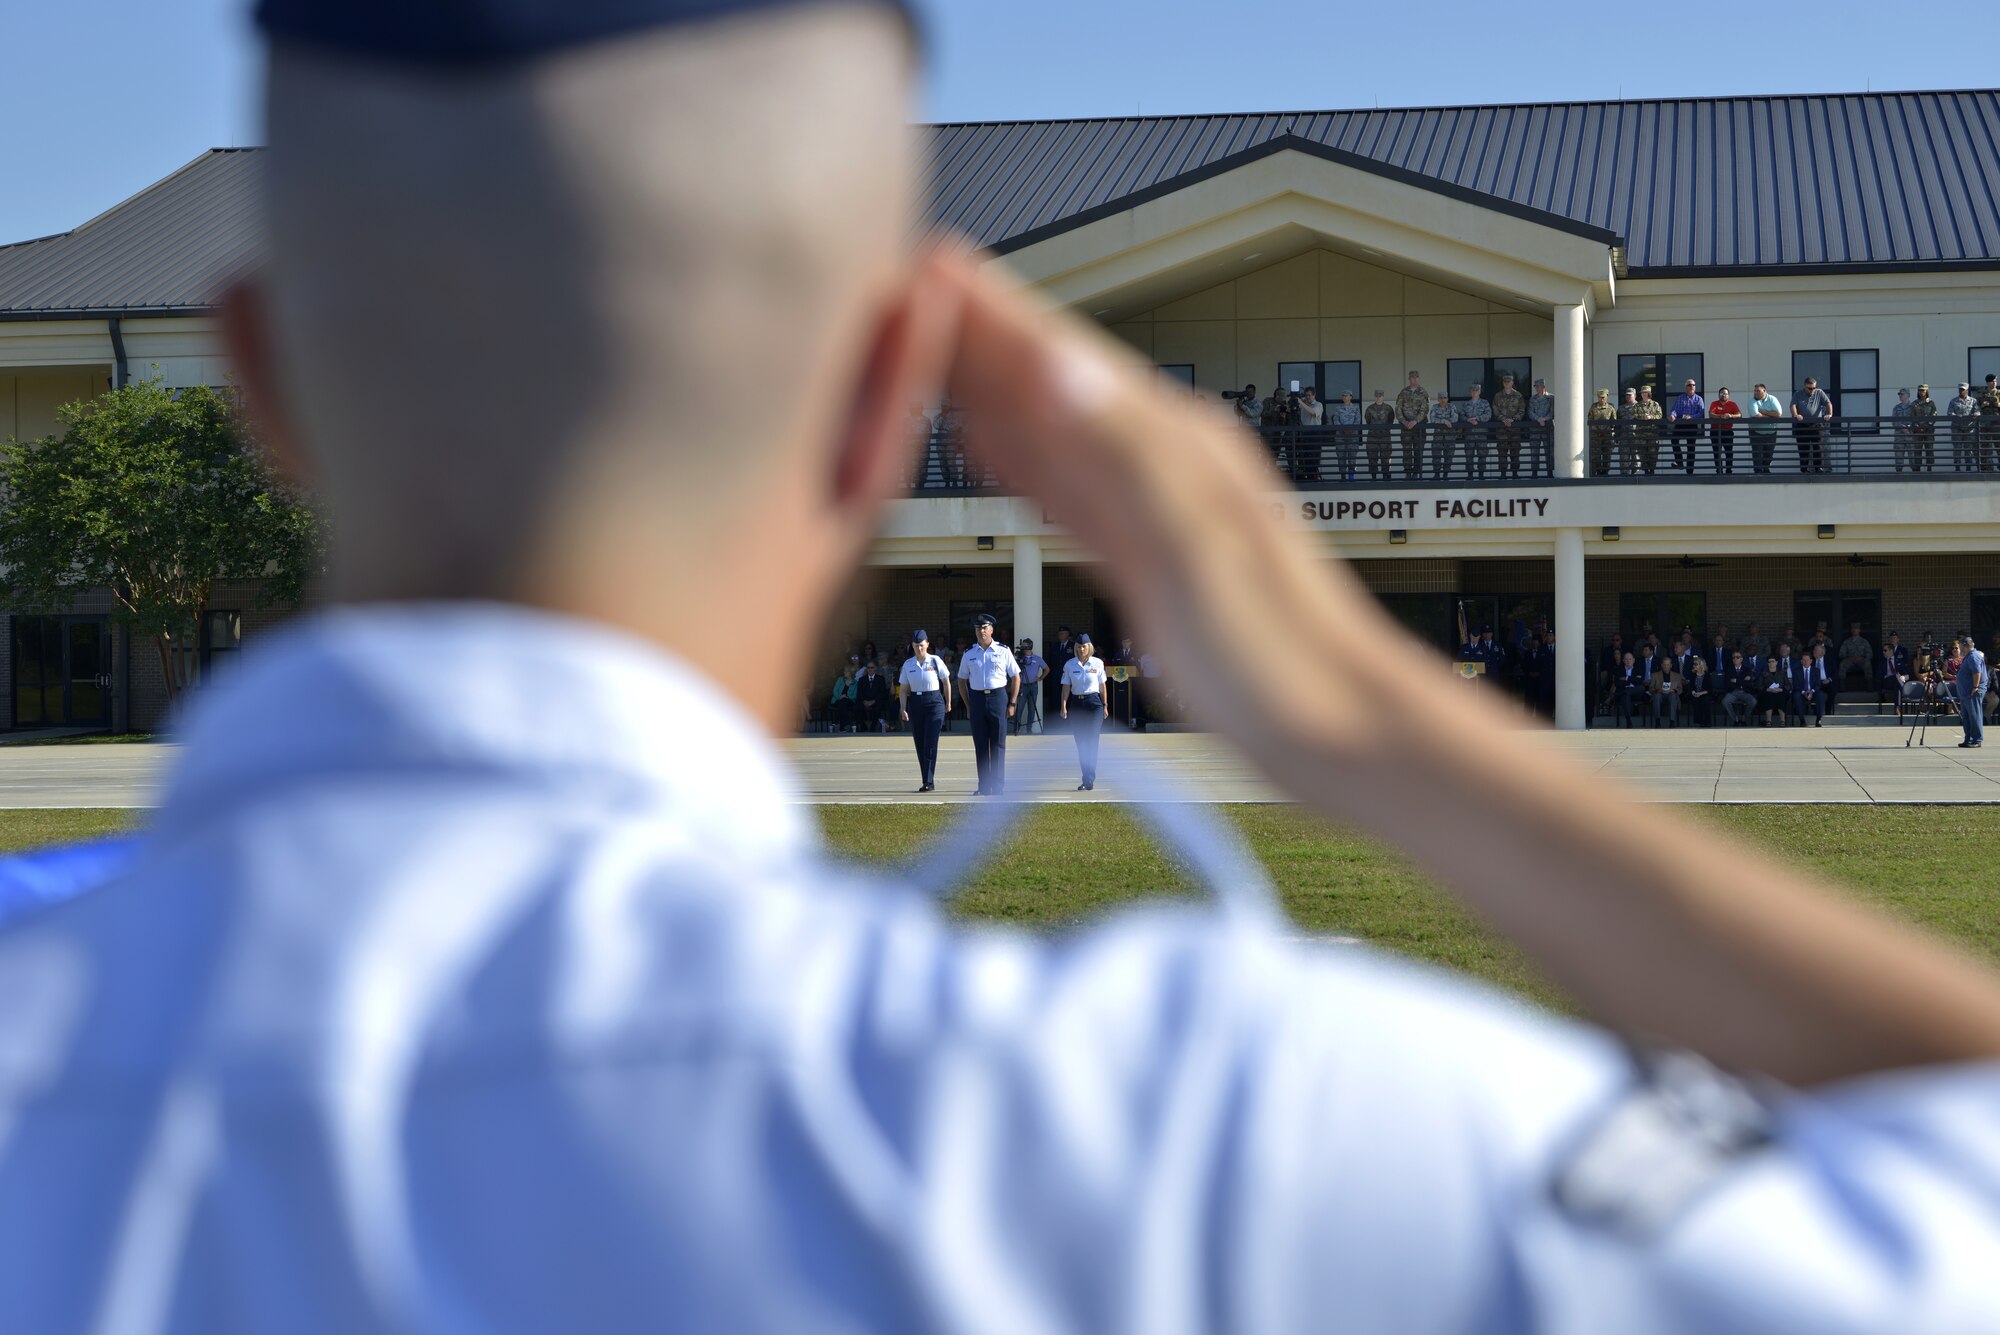 U.S. Air Force Col. Lance Burnett, 81st Training Wing vice commander, leads the troops during the 81st TRW change of command ceremony at the Levitow Training Support Facility drill pad at Keesler Air Force Base, Mississippi, May 16, 2019. The ceremony is a symbol of command being exchanged from one commander to the next. Col. Heather Blackwell assumed command from Col. Debra Lovette. (U.S. Air Force photo by Airman Seth Haddix)